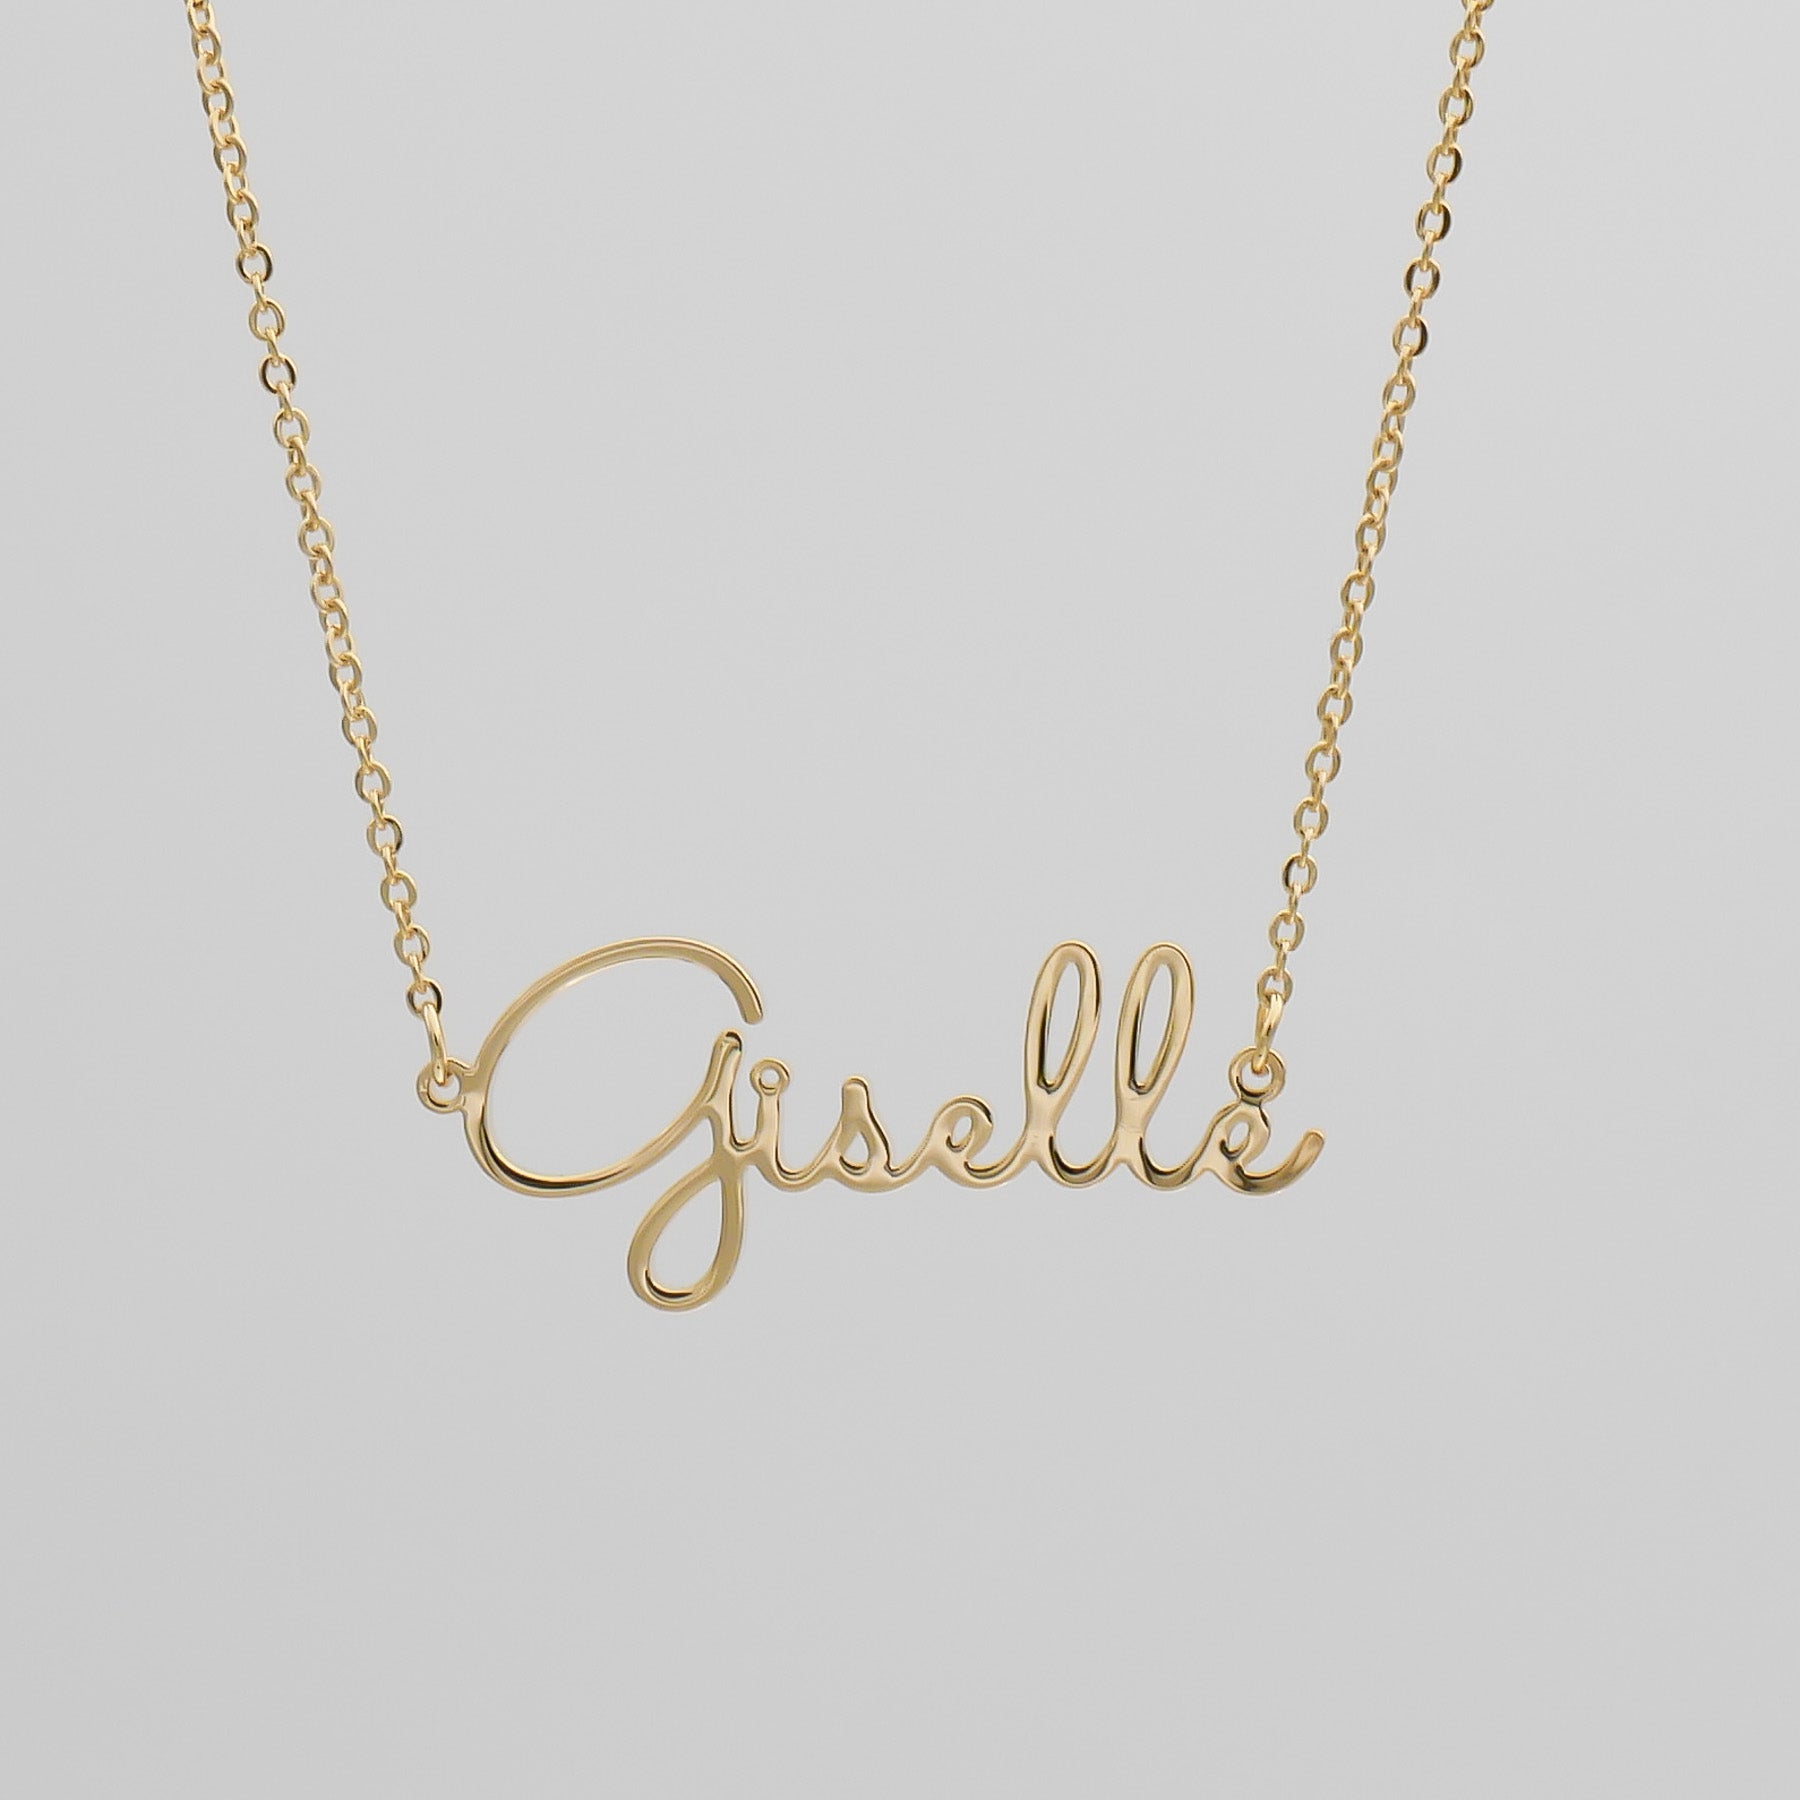 Gold name necklace that says Giselle 